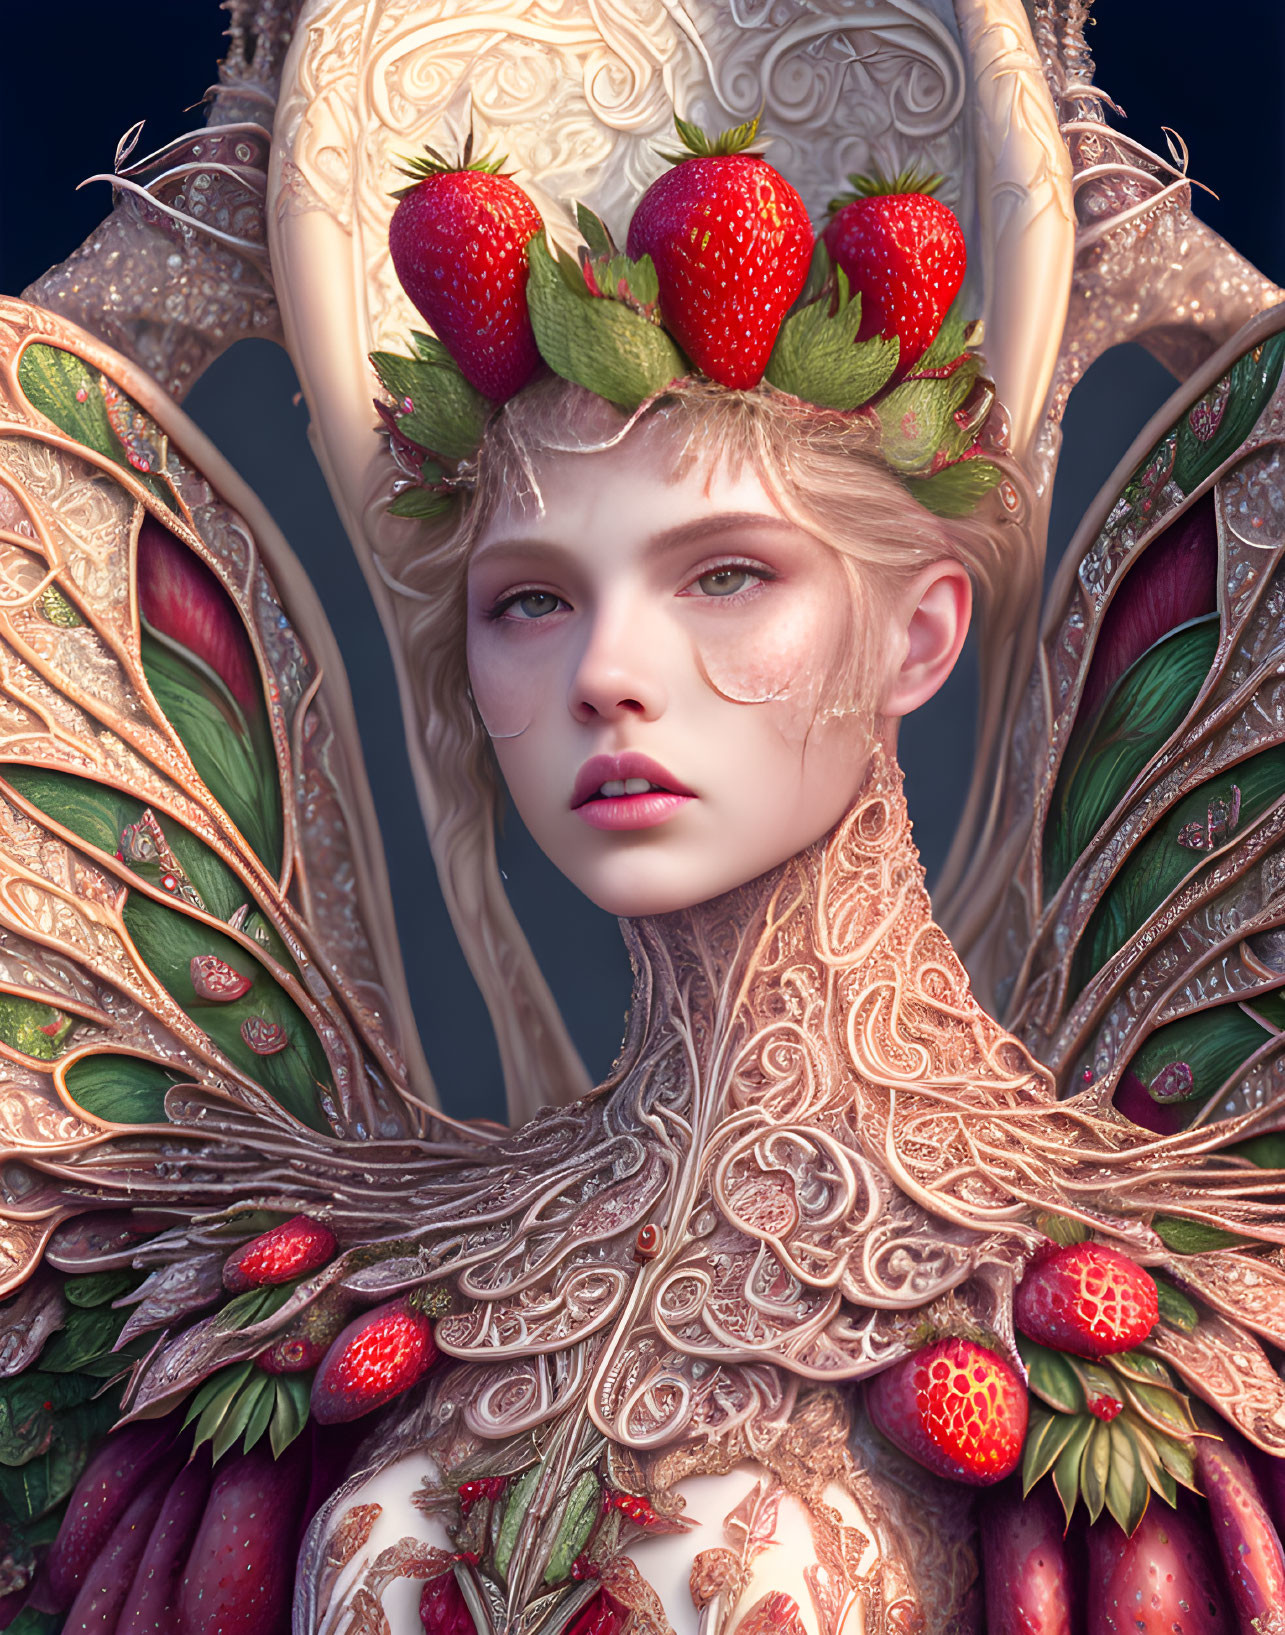 Intricate gold-embellished outfit with strawberry headdress